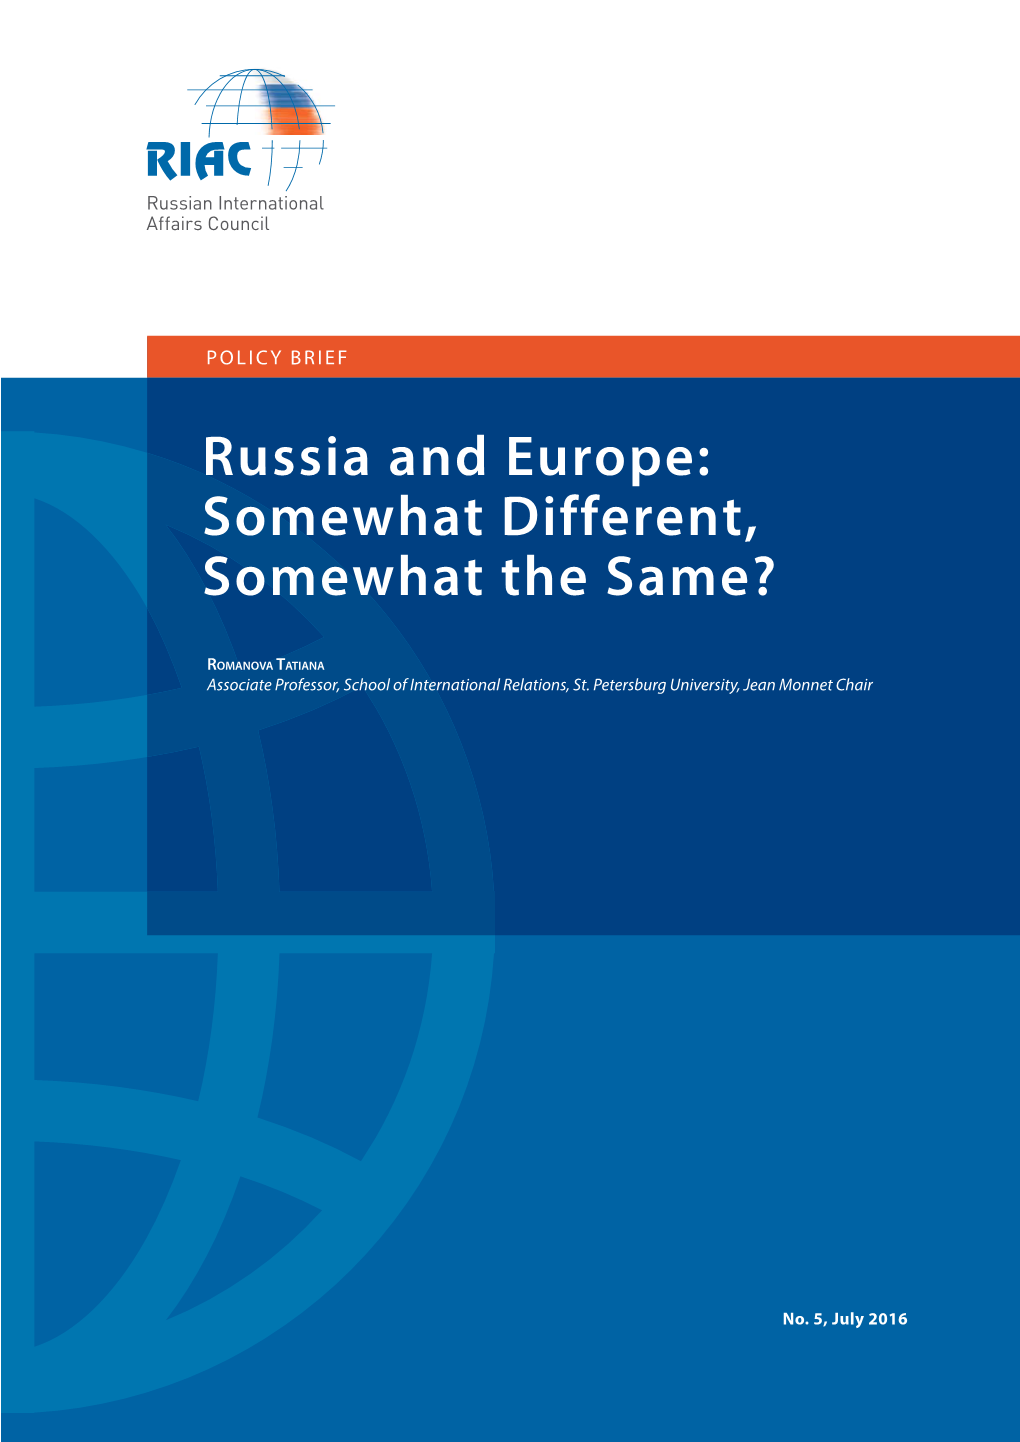 Russia and Europe: Somewhat Different, Somewhat the Same?